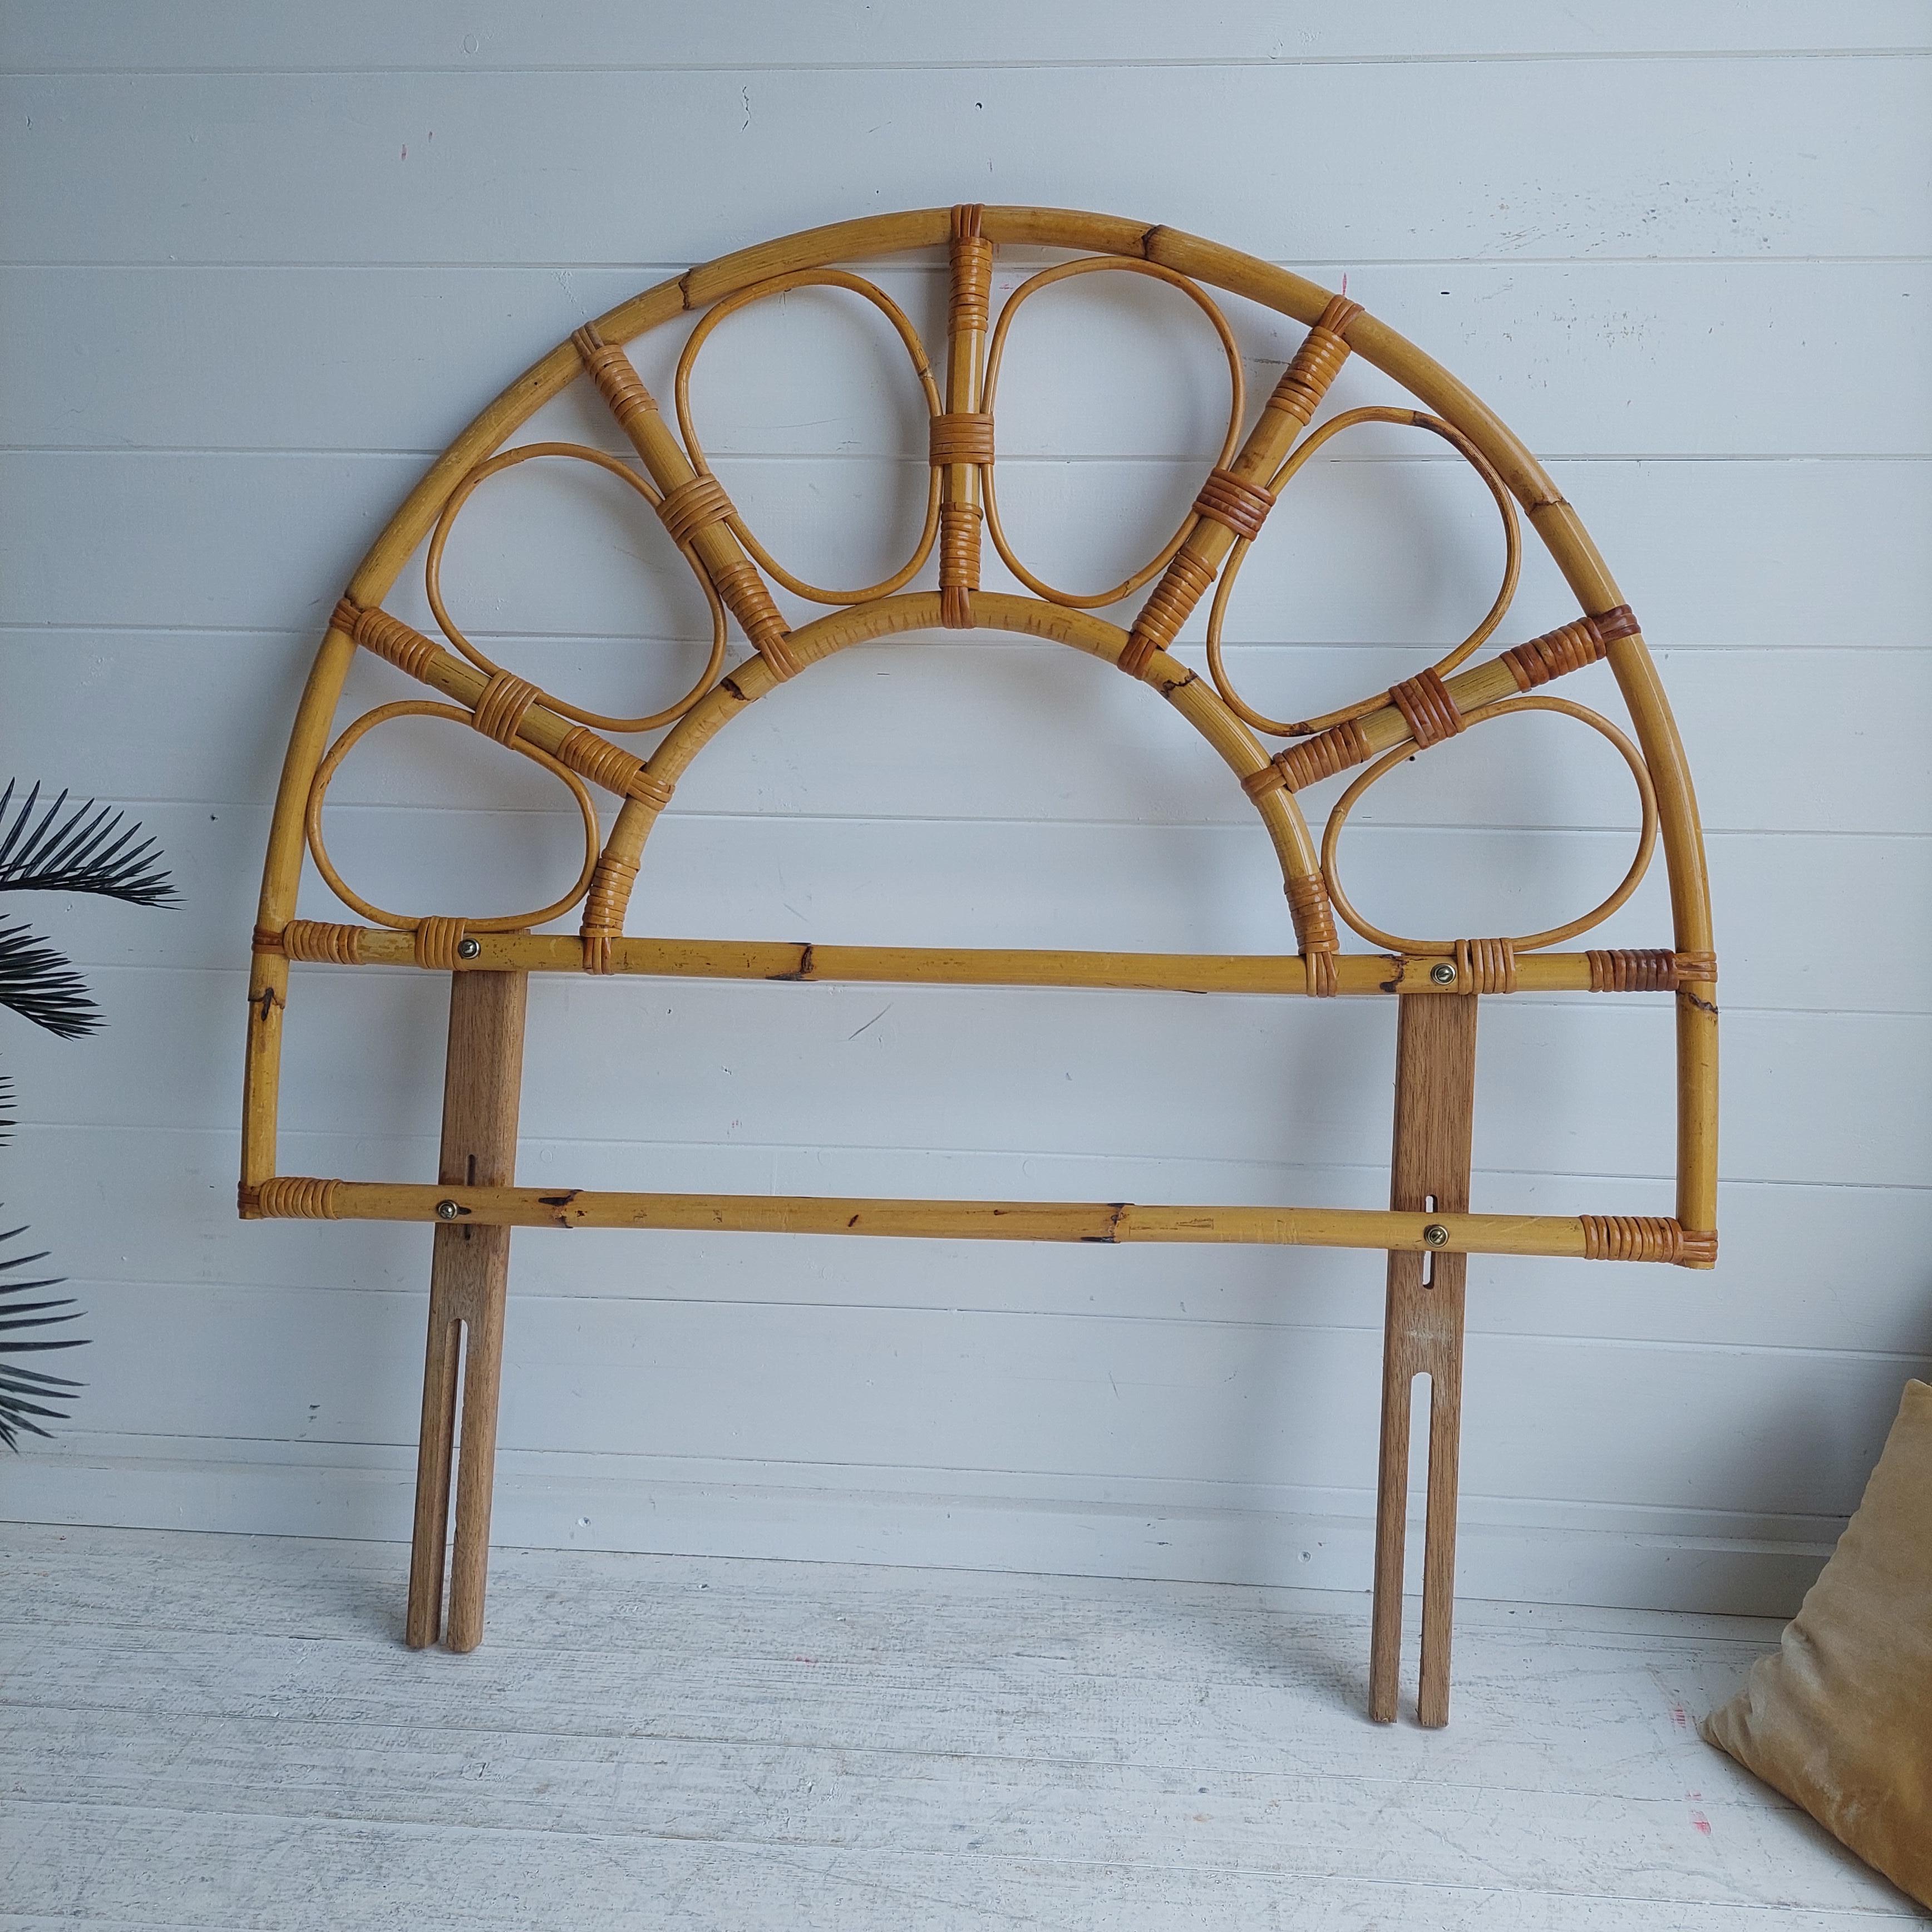 Vintage 70's Bamboo Single Headboard Mid Century In Good Condition For Sale In Leamington Spa, GB